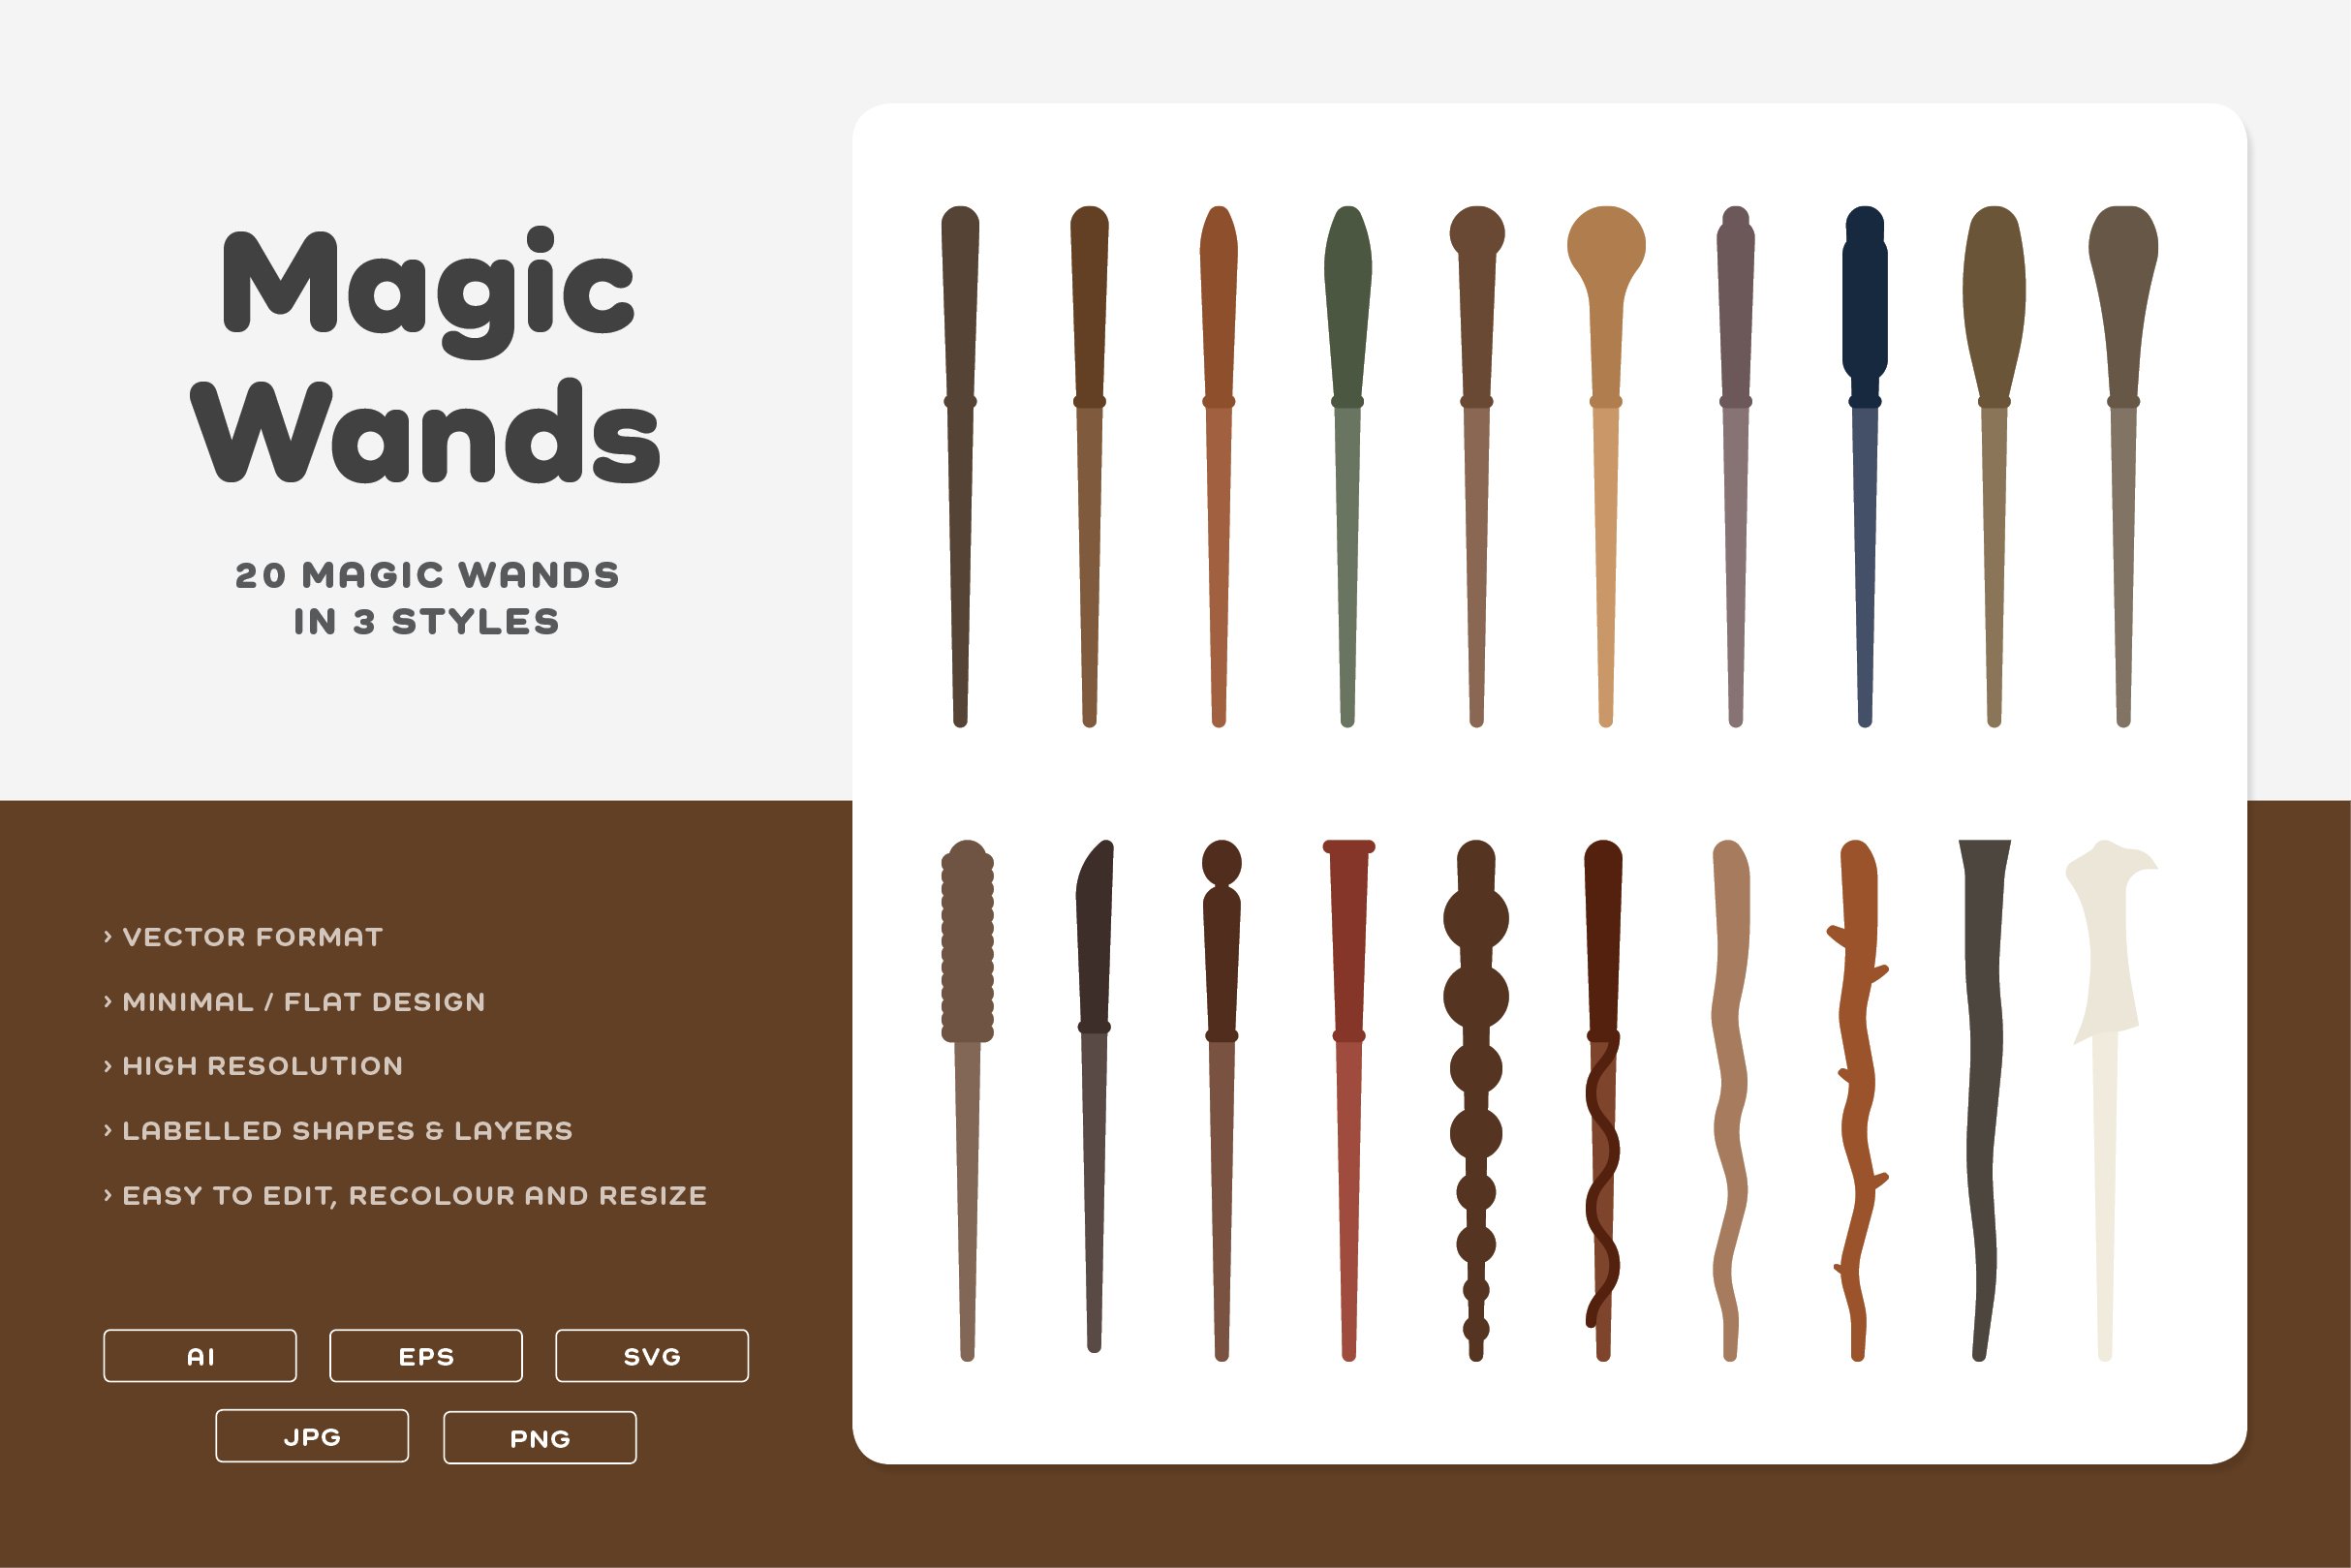 Magic Wands cover image.